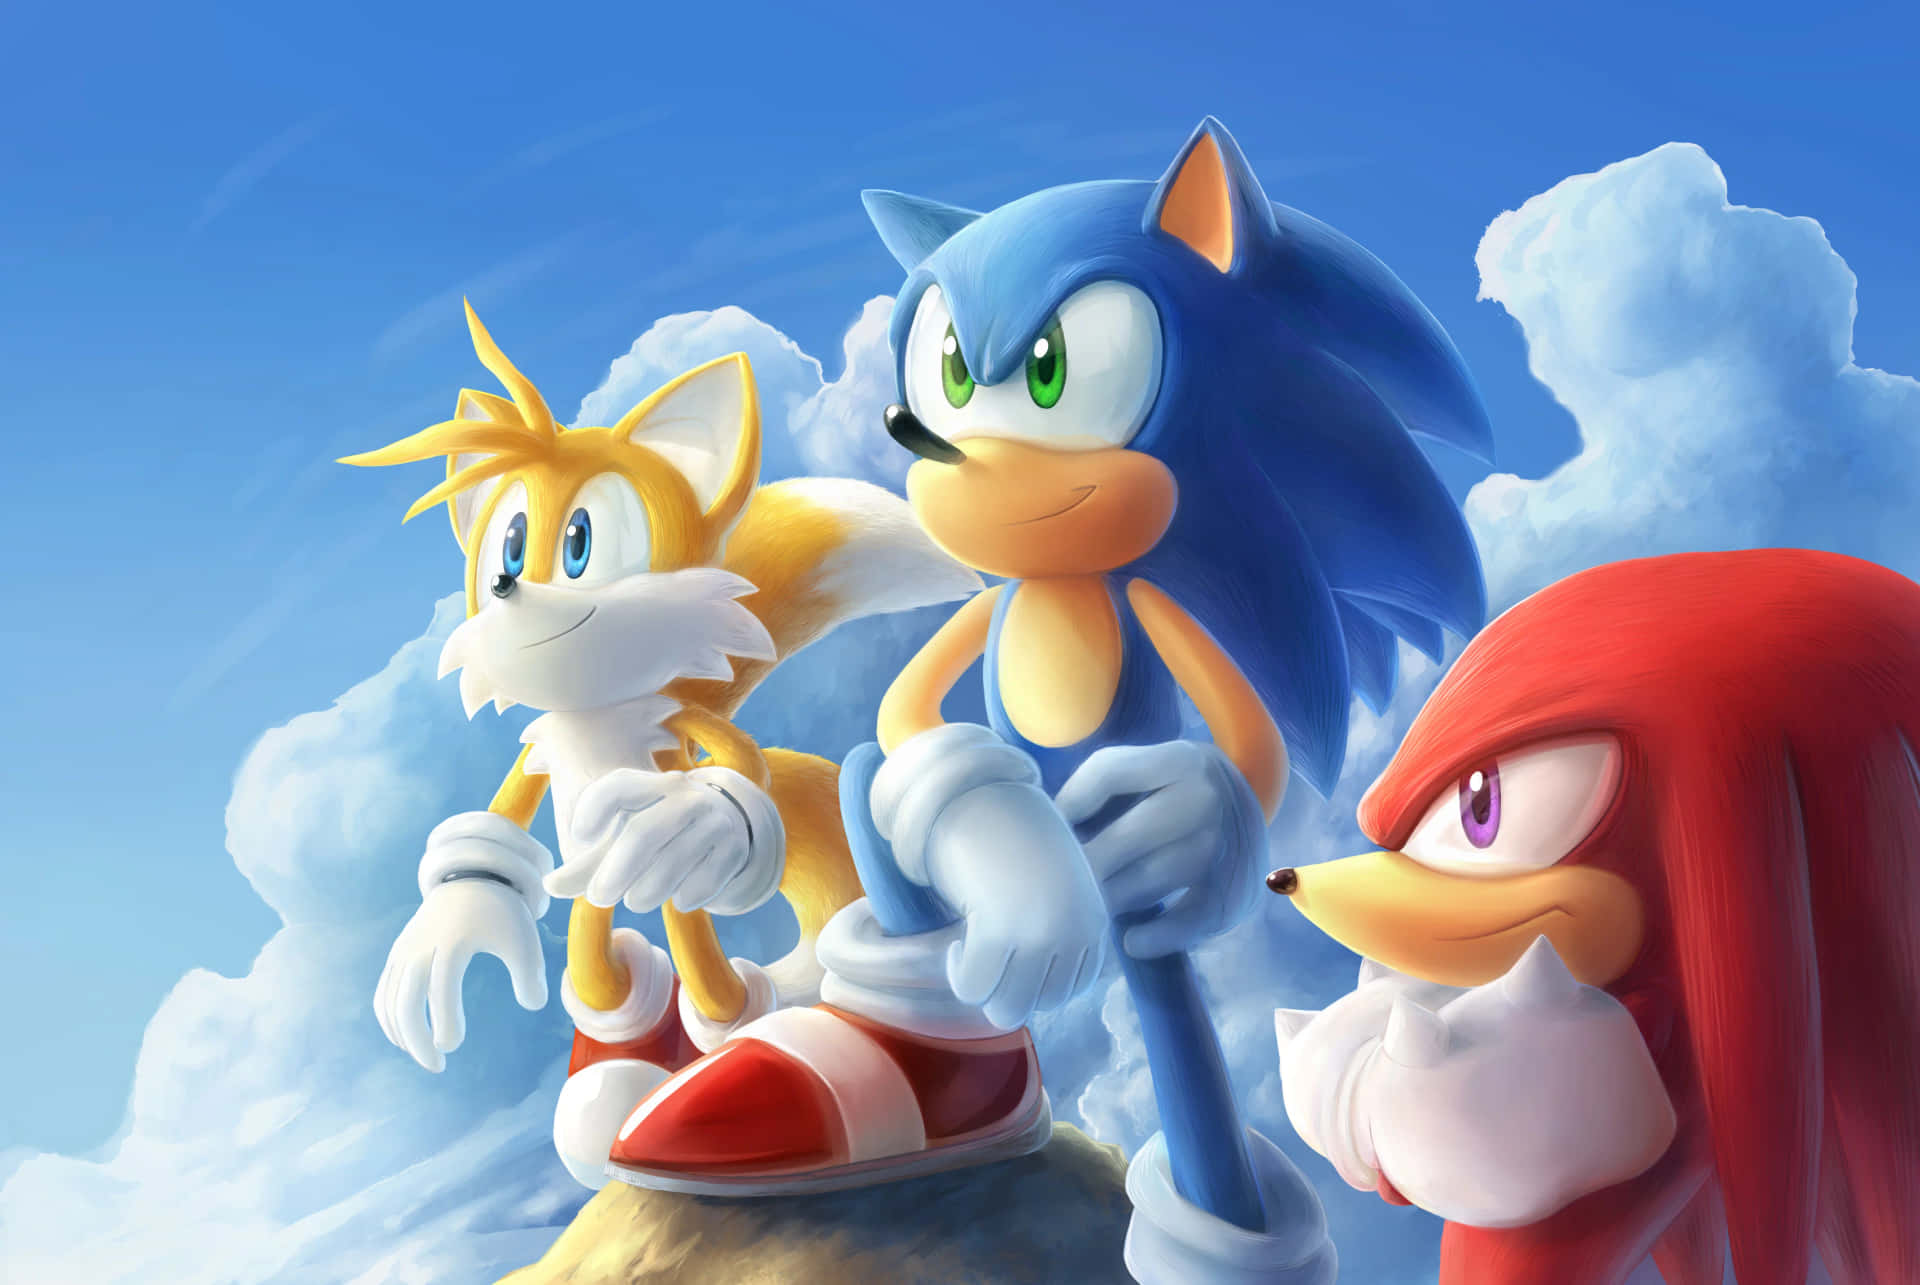 Sonic and Tails in action Wallpaper